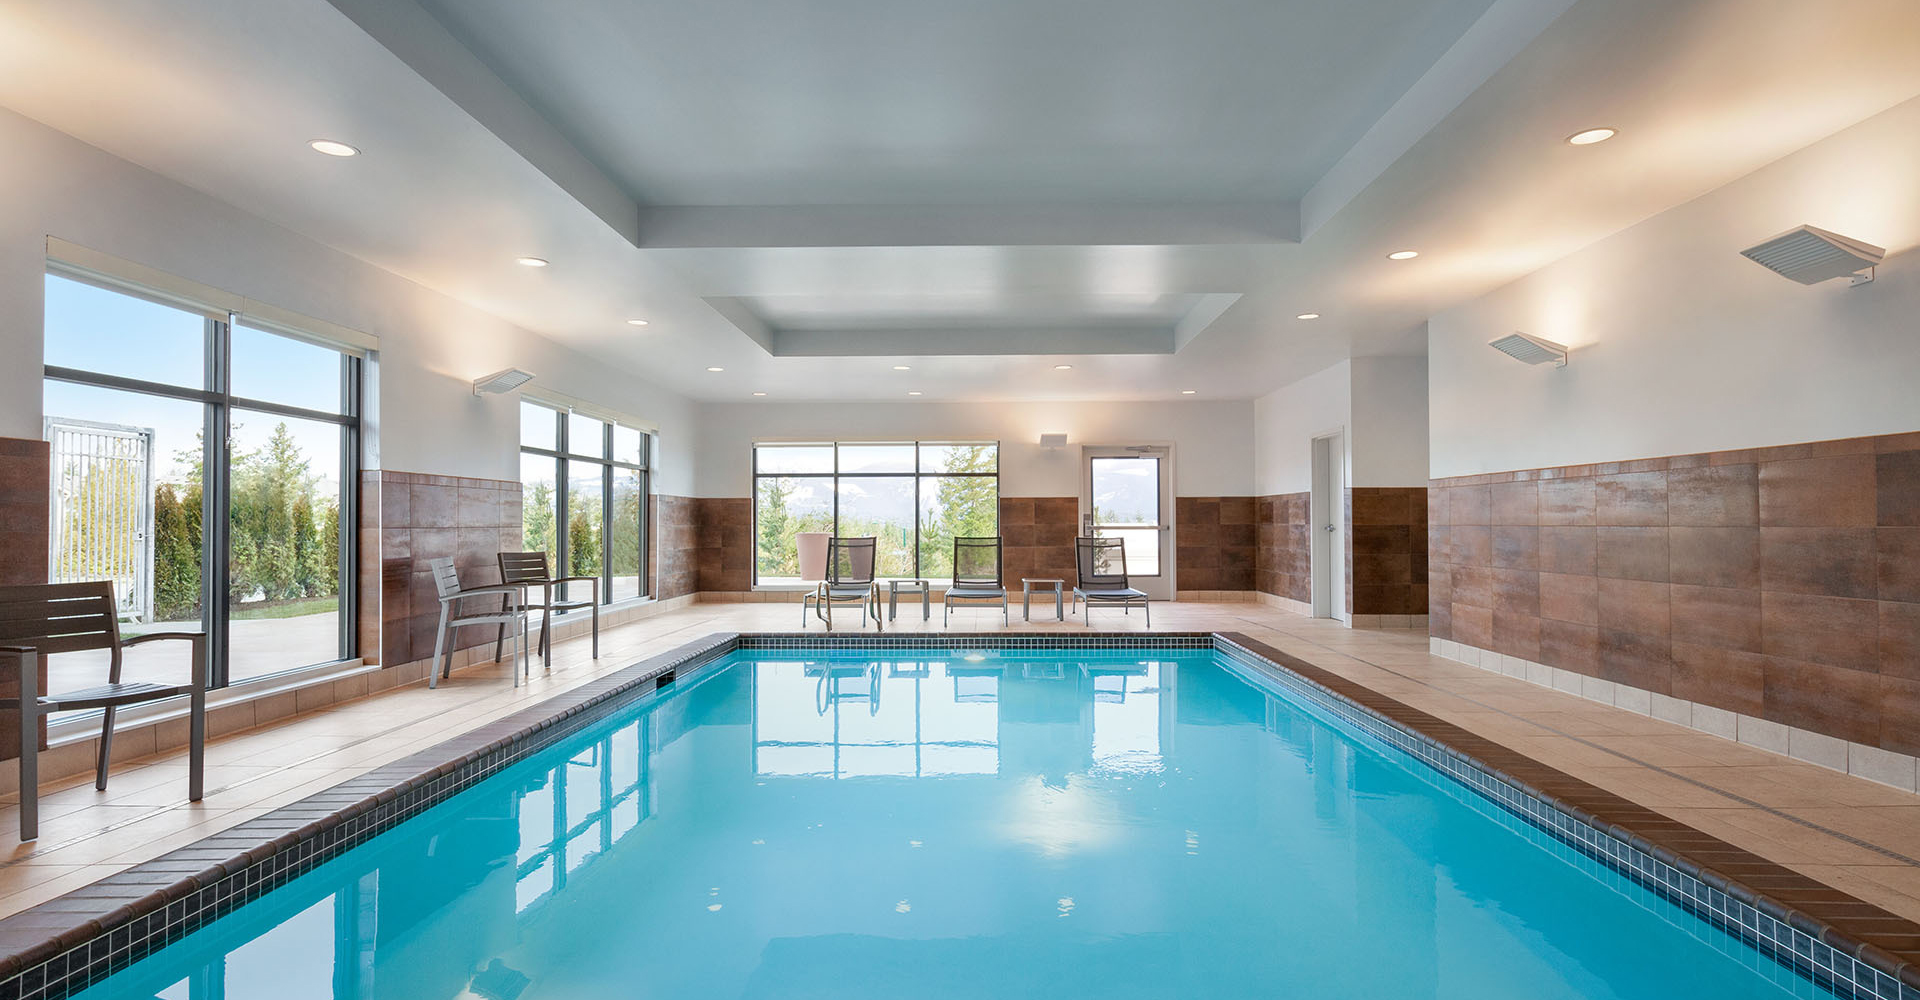 the indoor pool with light shining in